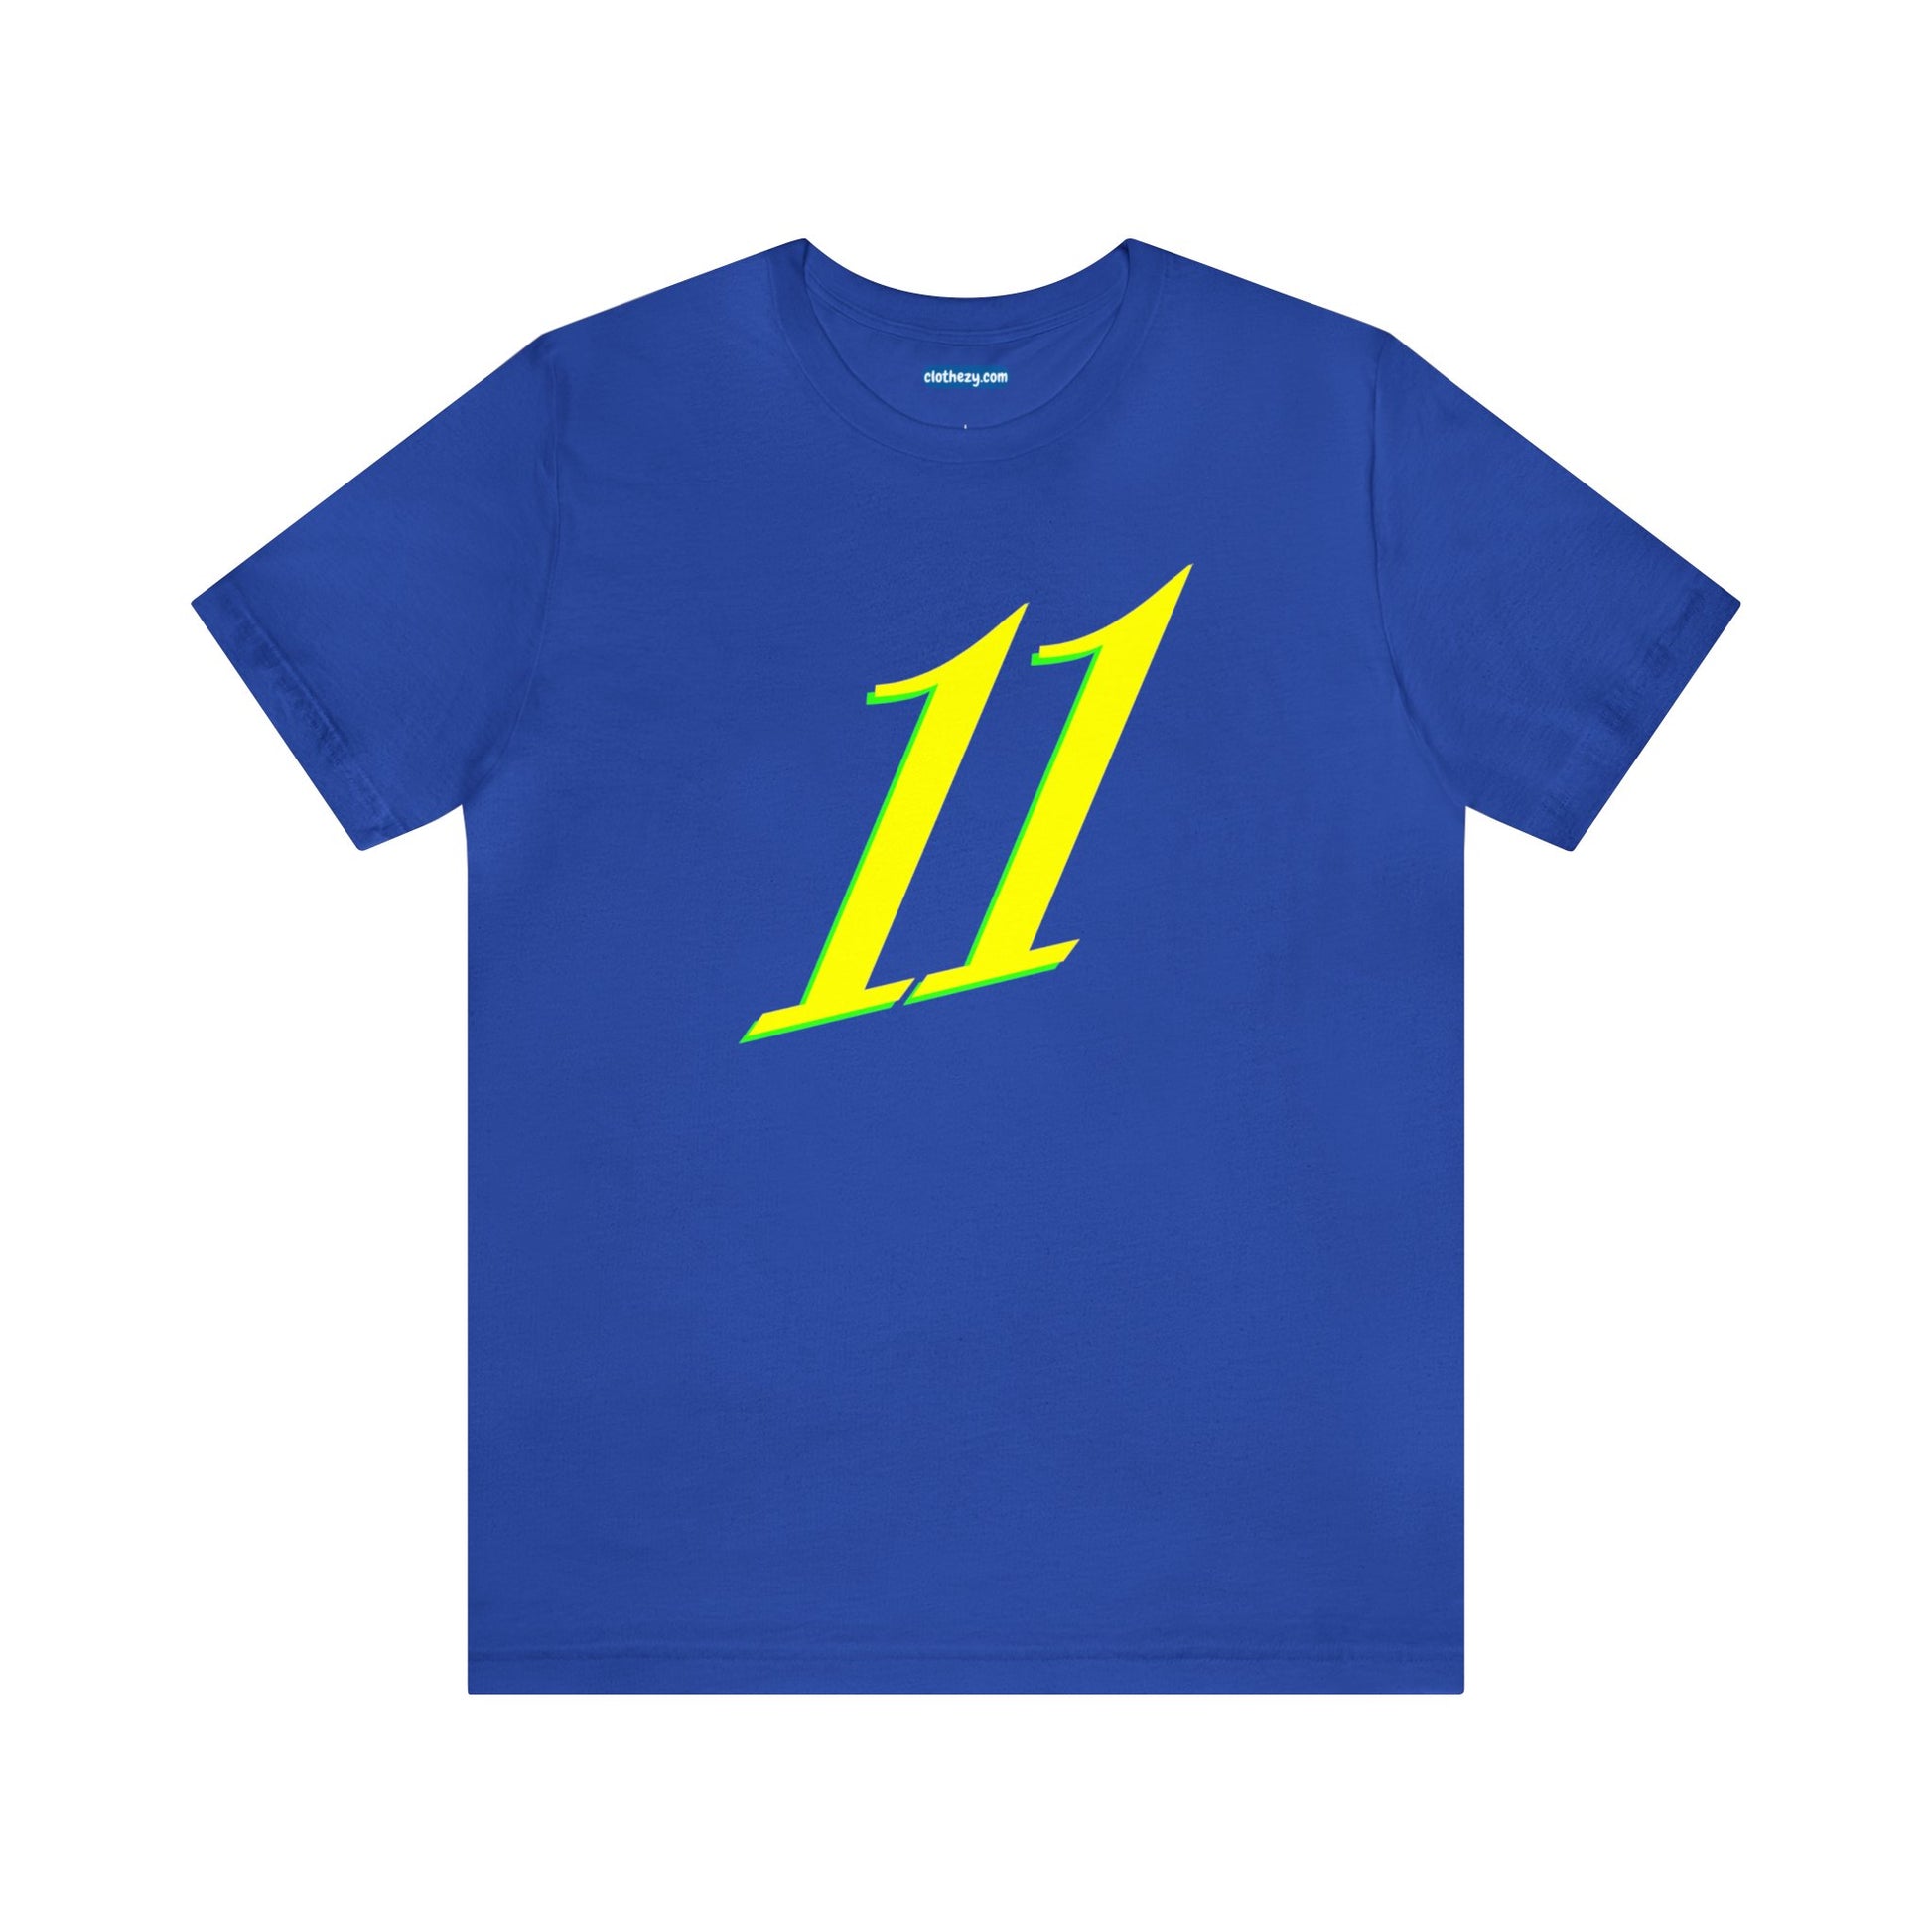 Number 11 Design - Soft Cotton Tee for birthdays and celebrations, Gift for friends and family, Multiple Options by clothezy.com in Royal Blue Size Small - Buy Now